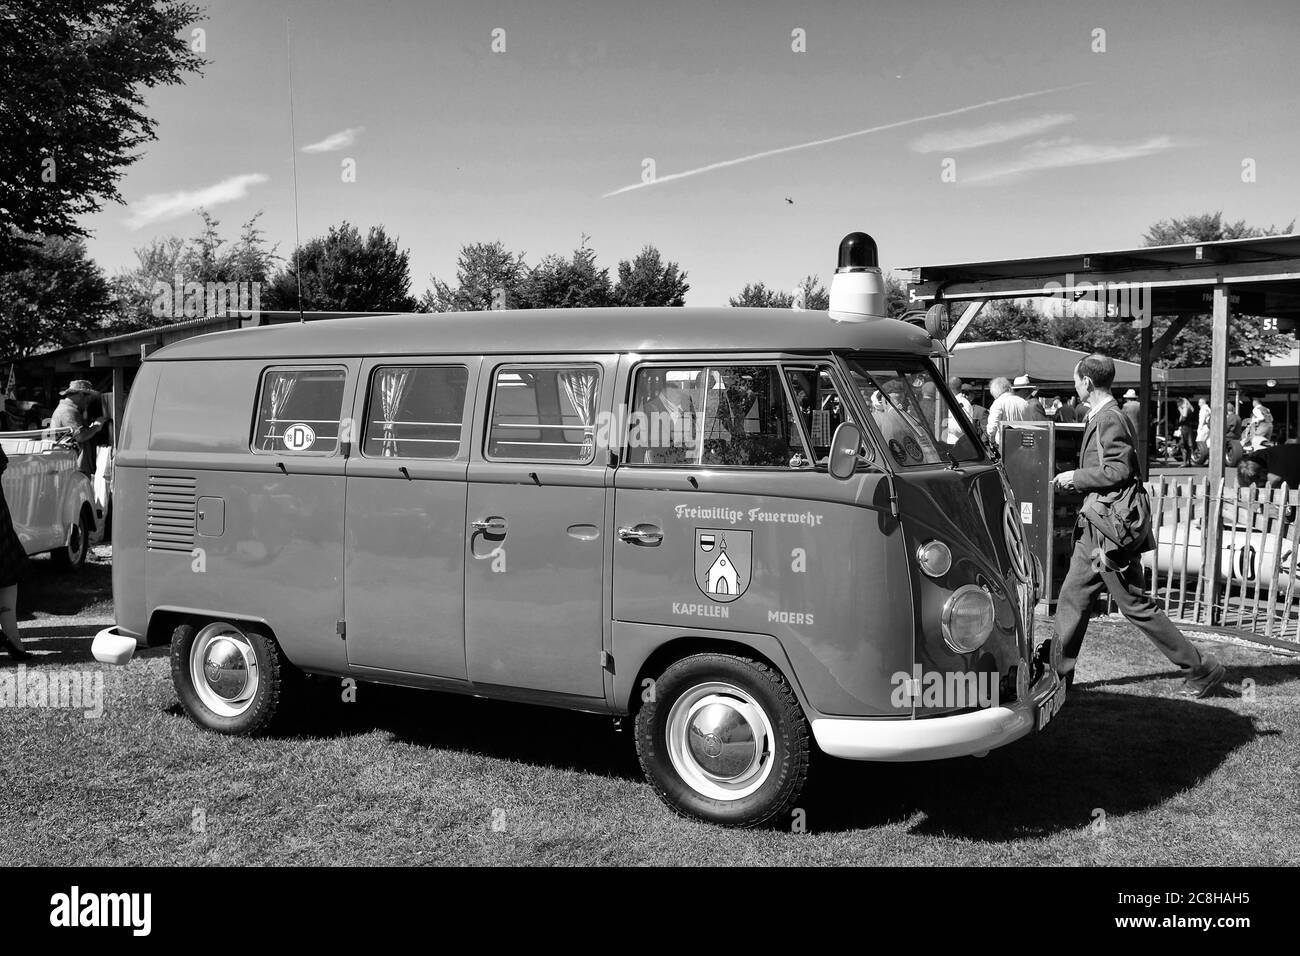 September 2019 - VW microbus used by the German fire service, now restored at The Goodwood Revival Stock Photo